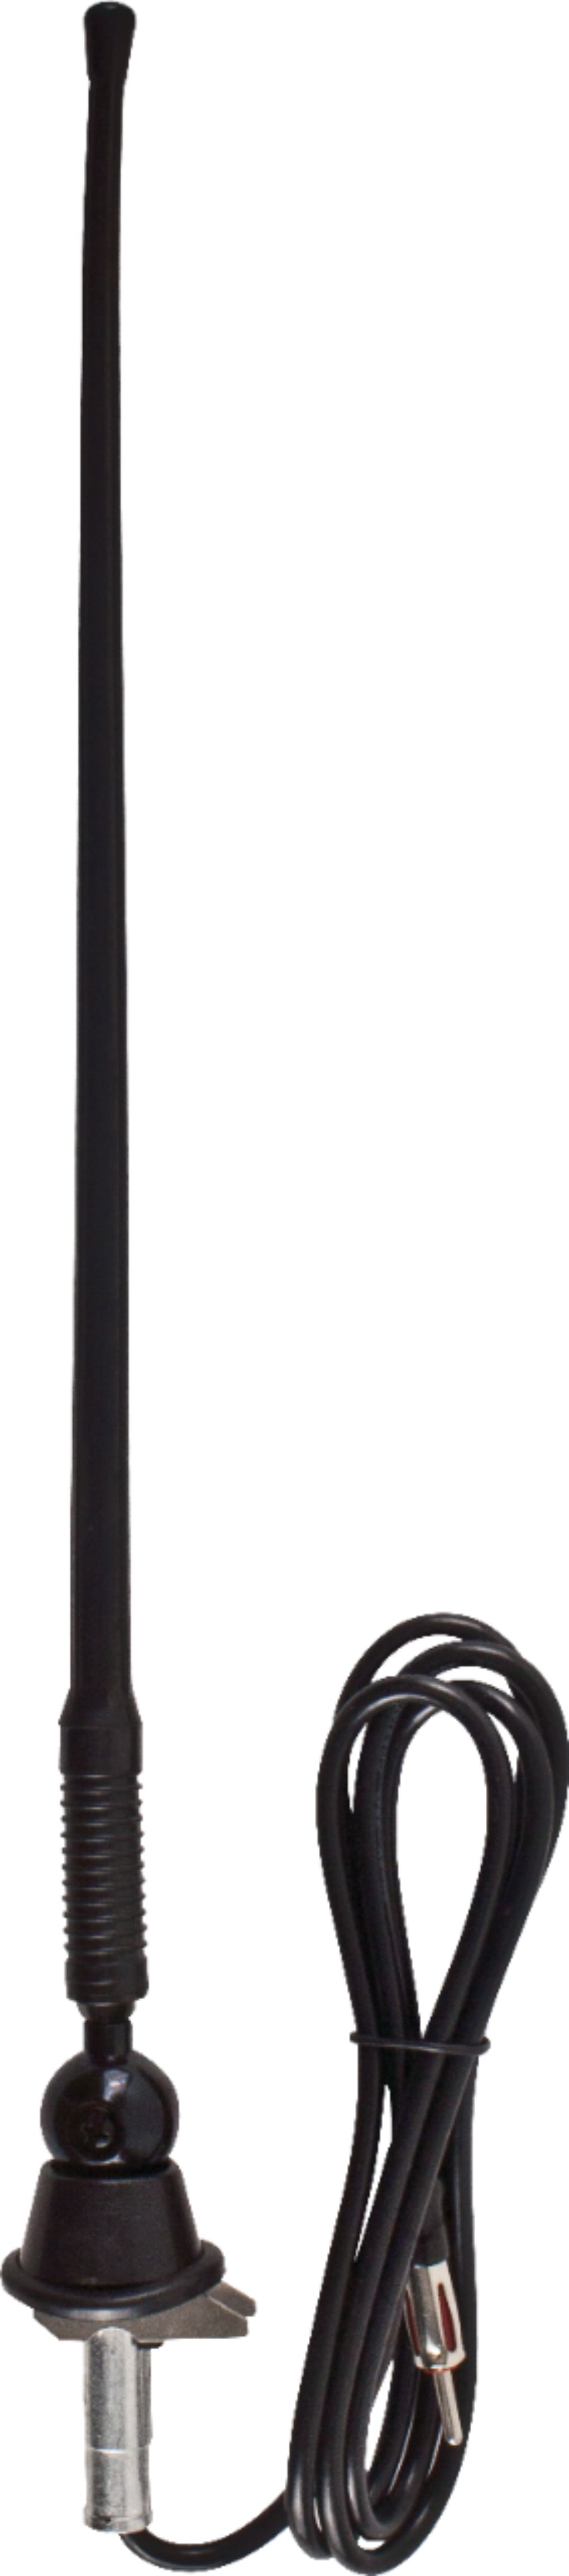 Metra 44-US07R Top Or Side Mount Rubber Antenna